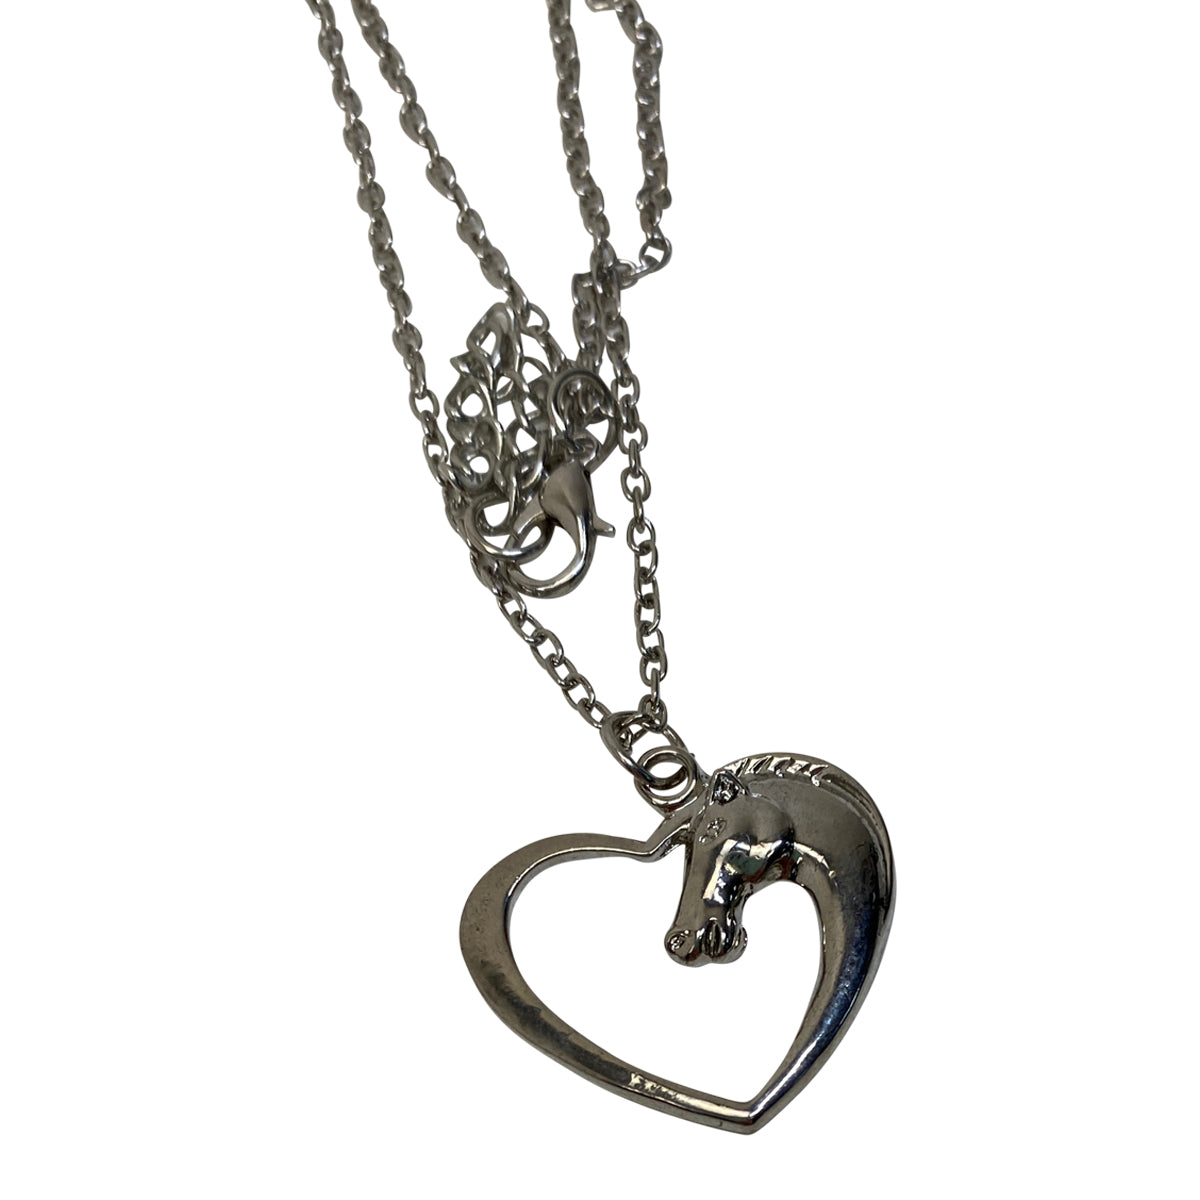 Luvalti Horse Heart Necklace in Silver